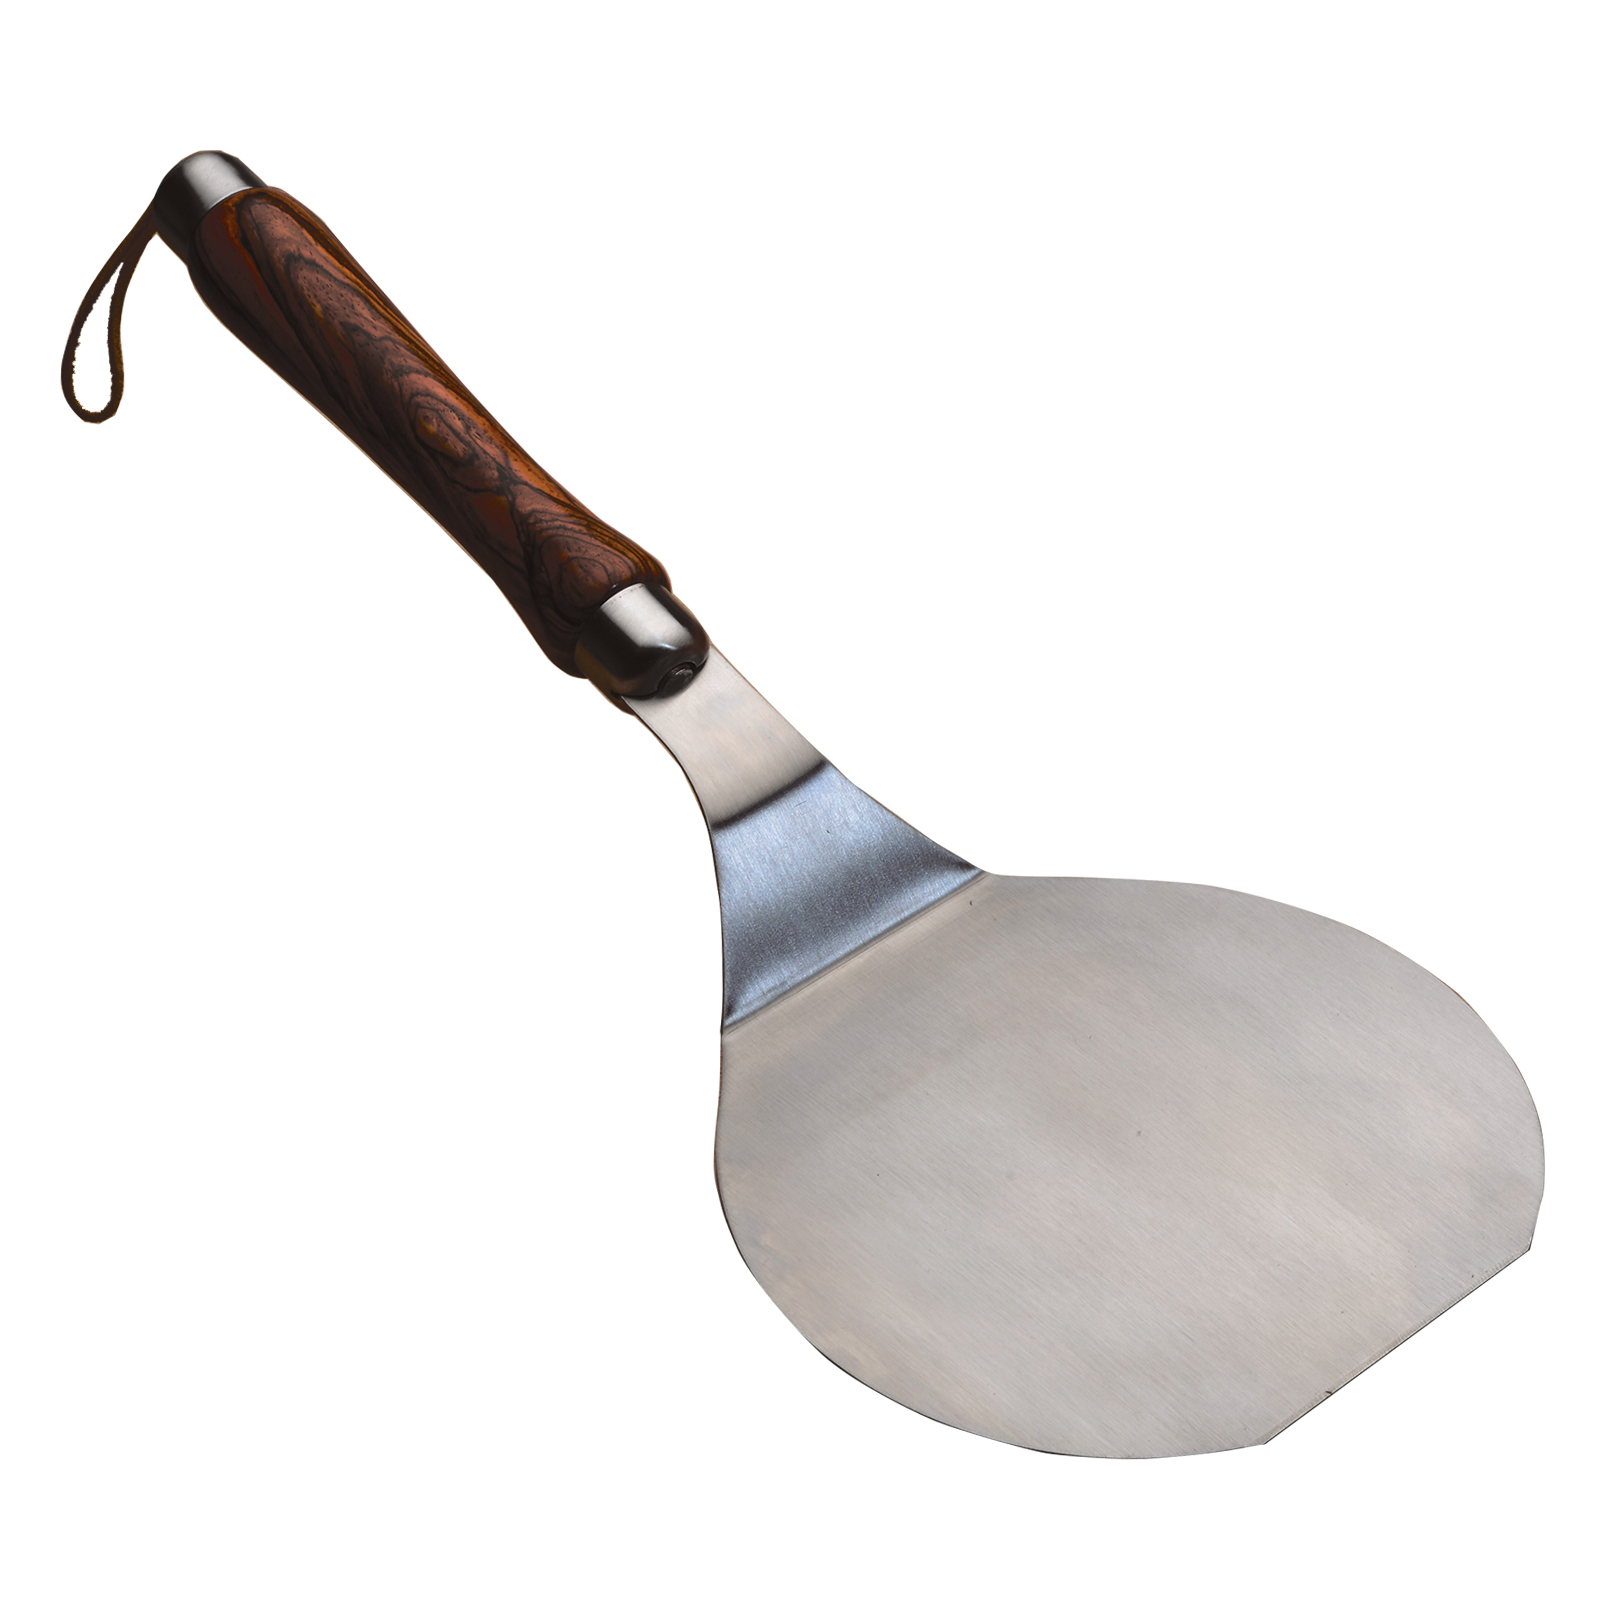 round spatula with holes